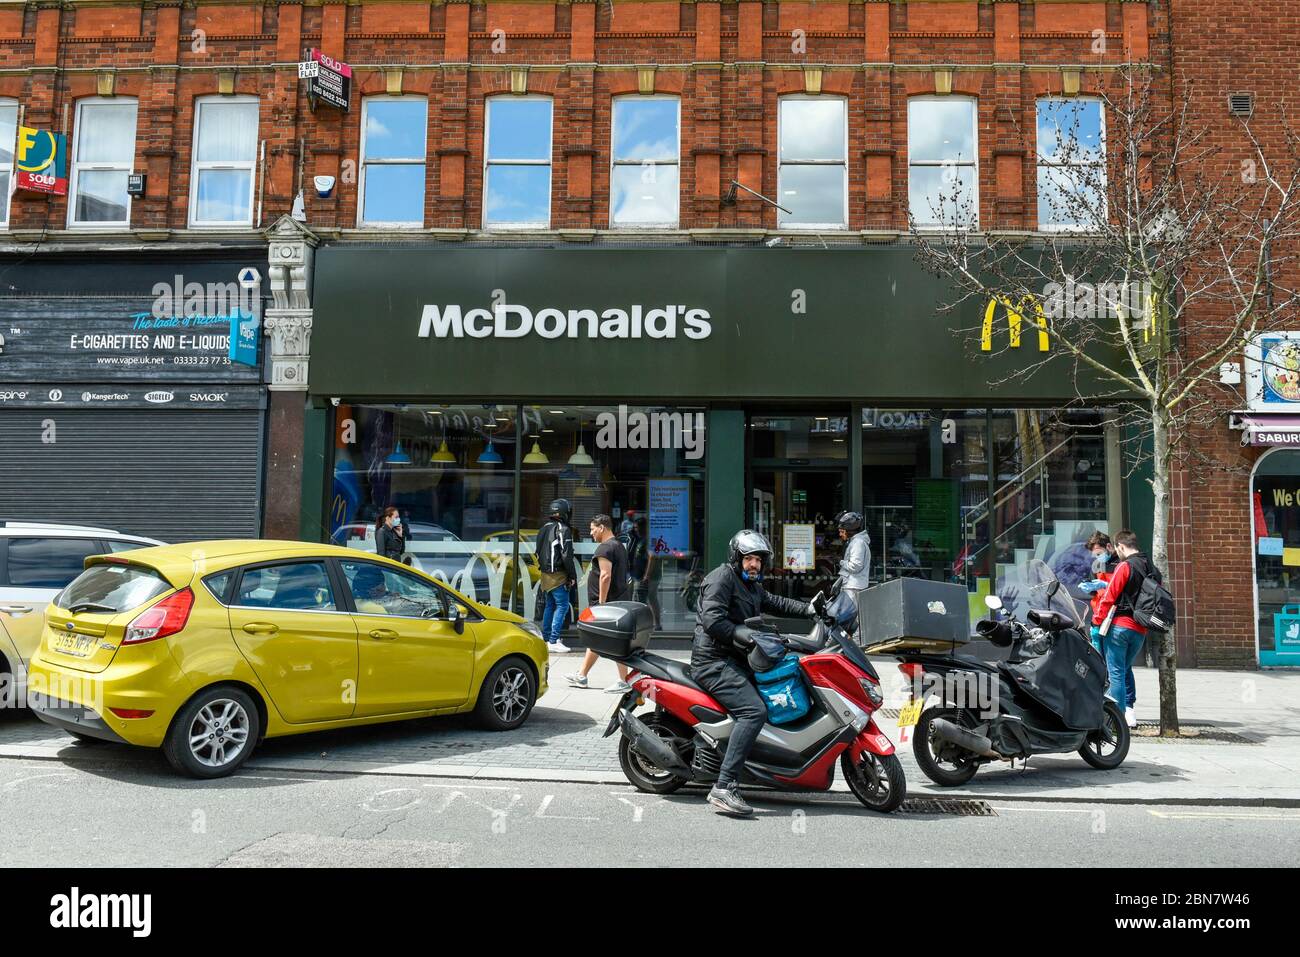 London, UK.  13 May 2020.  The McDonald's fast food restaurant in Harrow reopens for 'McDelivery' during the ongoing coronavirus pandemic.  The restaurant is one of 14 in the UK that the chain is partially reopening with a limited menu and delivery only.  Delivery is satisfied by third parties such as Uber Eats and Deliveroo.  Credit: Stephen Chung / Alamy Live News Stock Photo